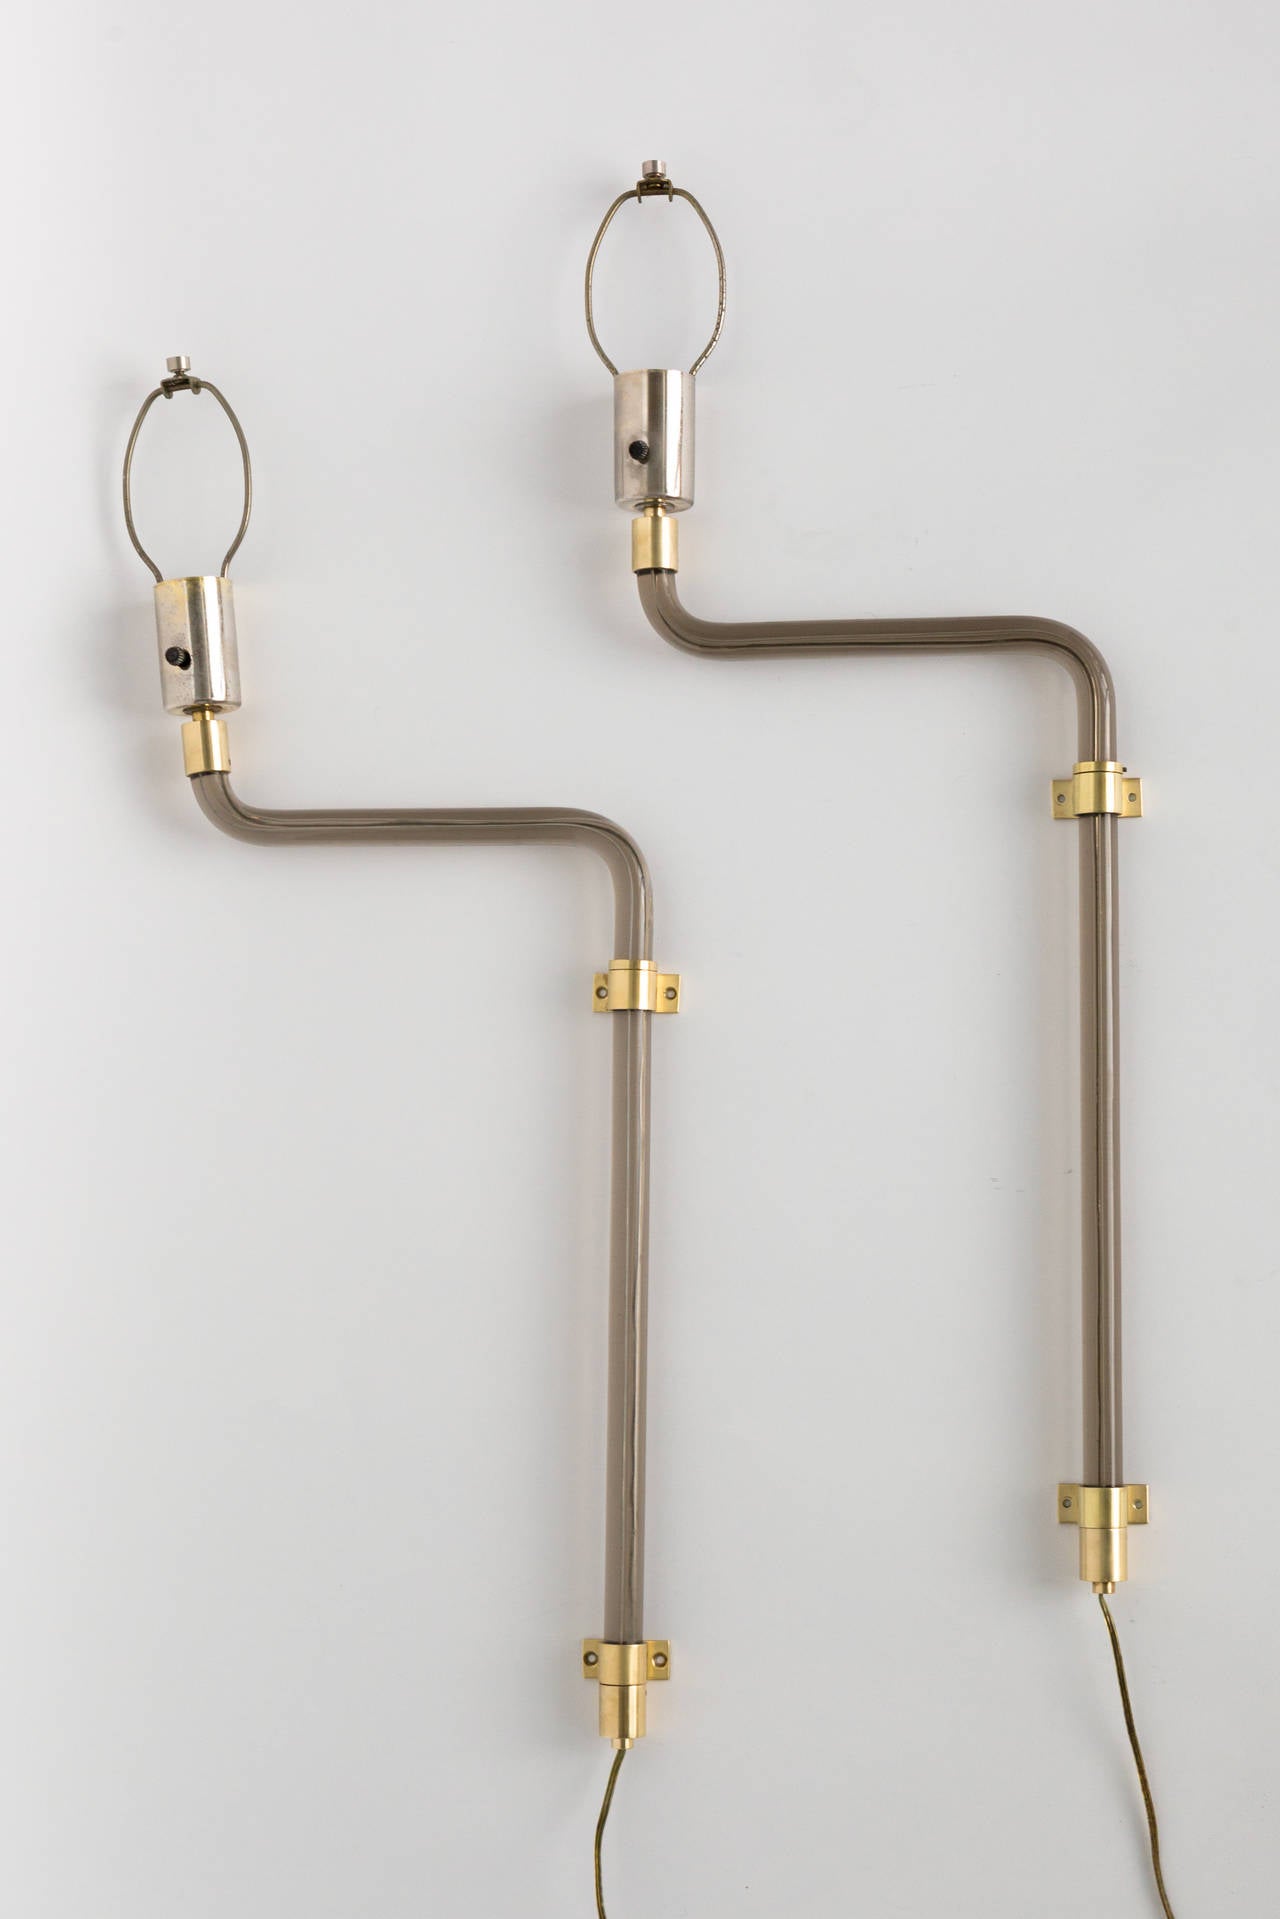 Pair of Mid-Century crylicord Lucite wall lights or sconces by Peter Hamburger for Kovacs.